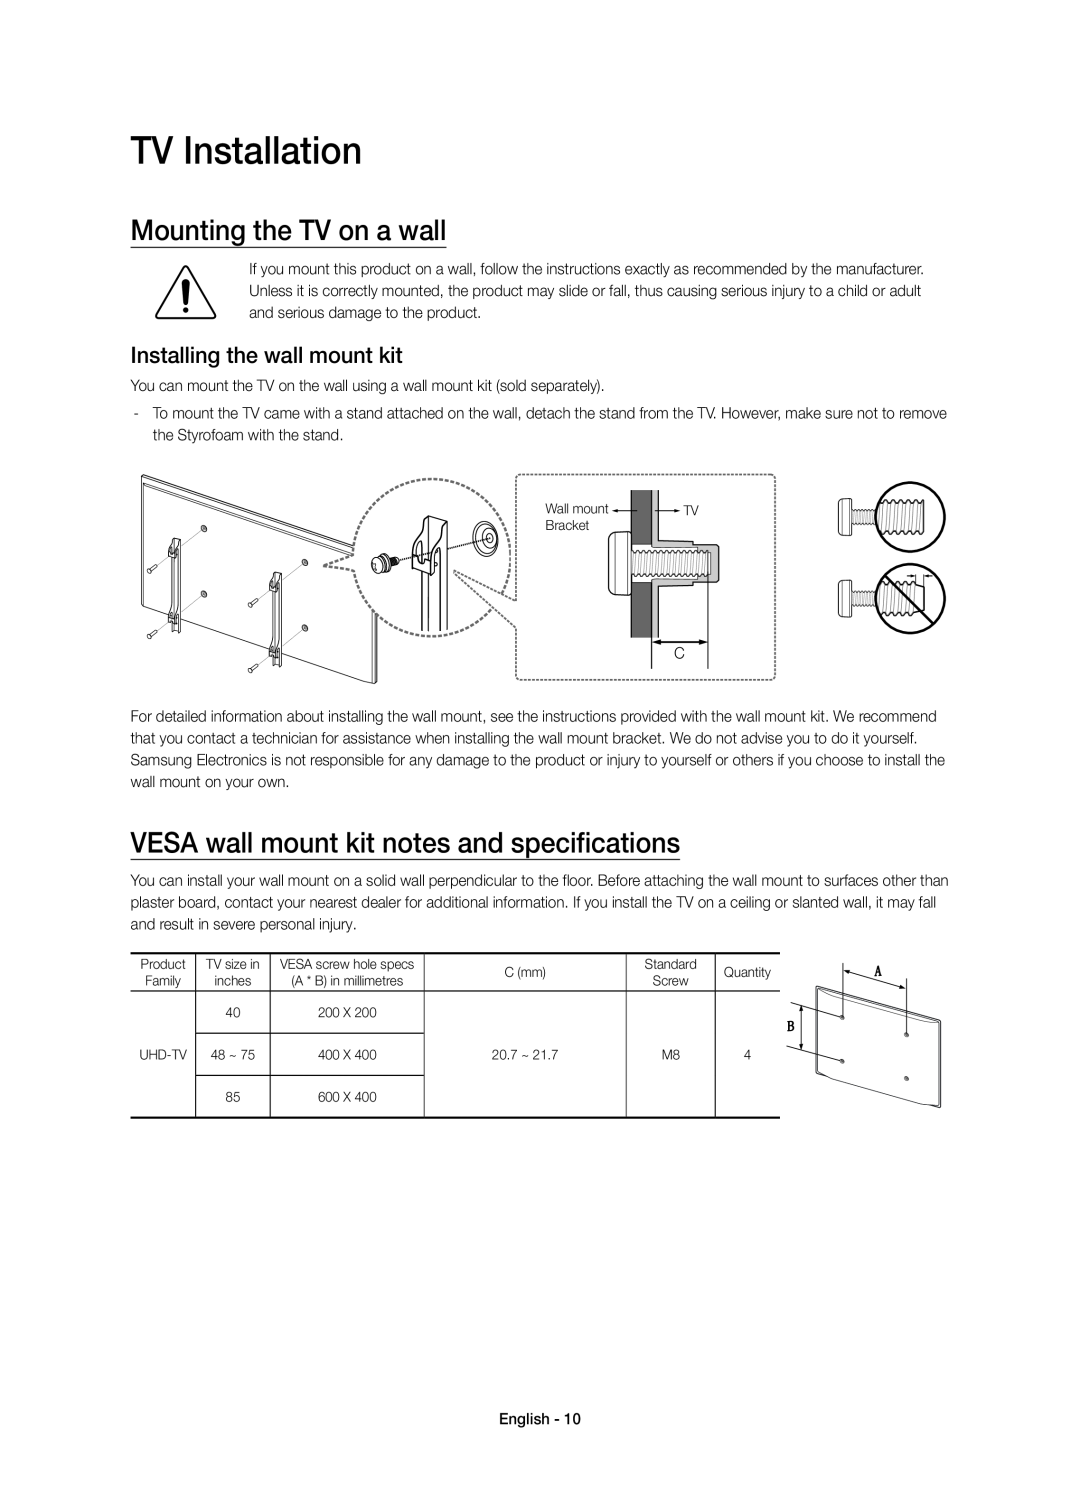 Samsung UE40JU7000TXXC manual TV Installation, Mounting the TV on a wall, VESA wall mount kit notes and specifications 